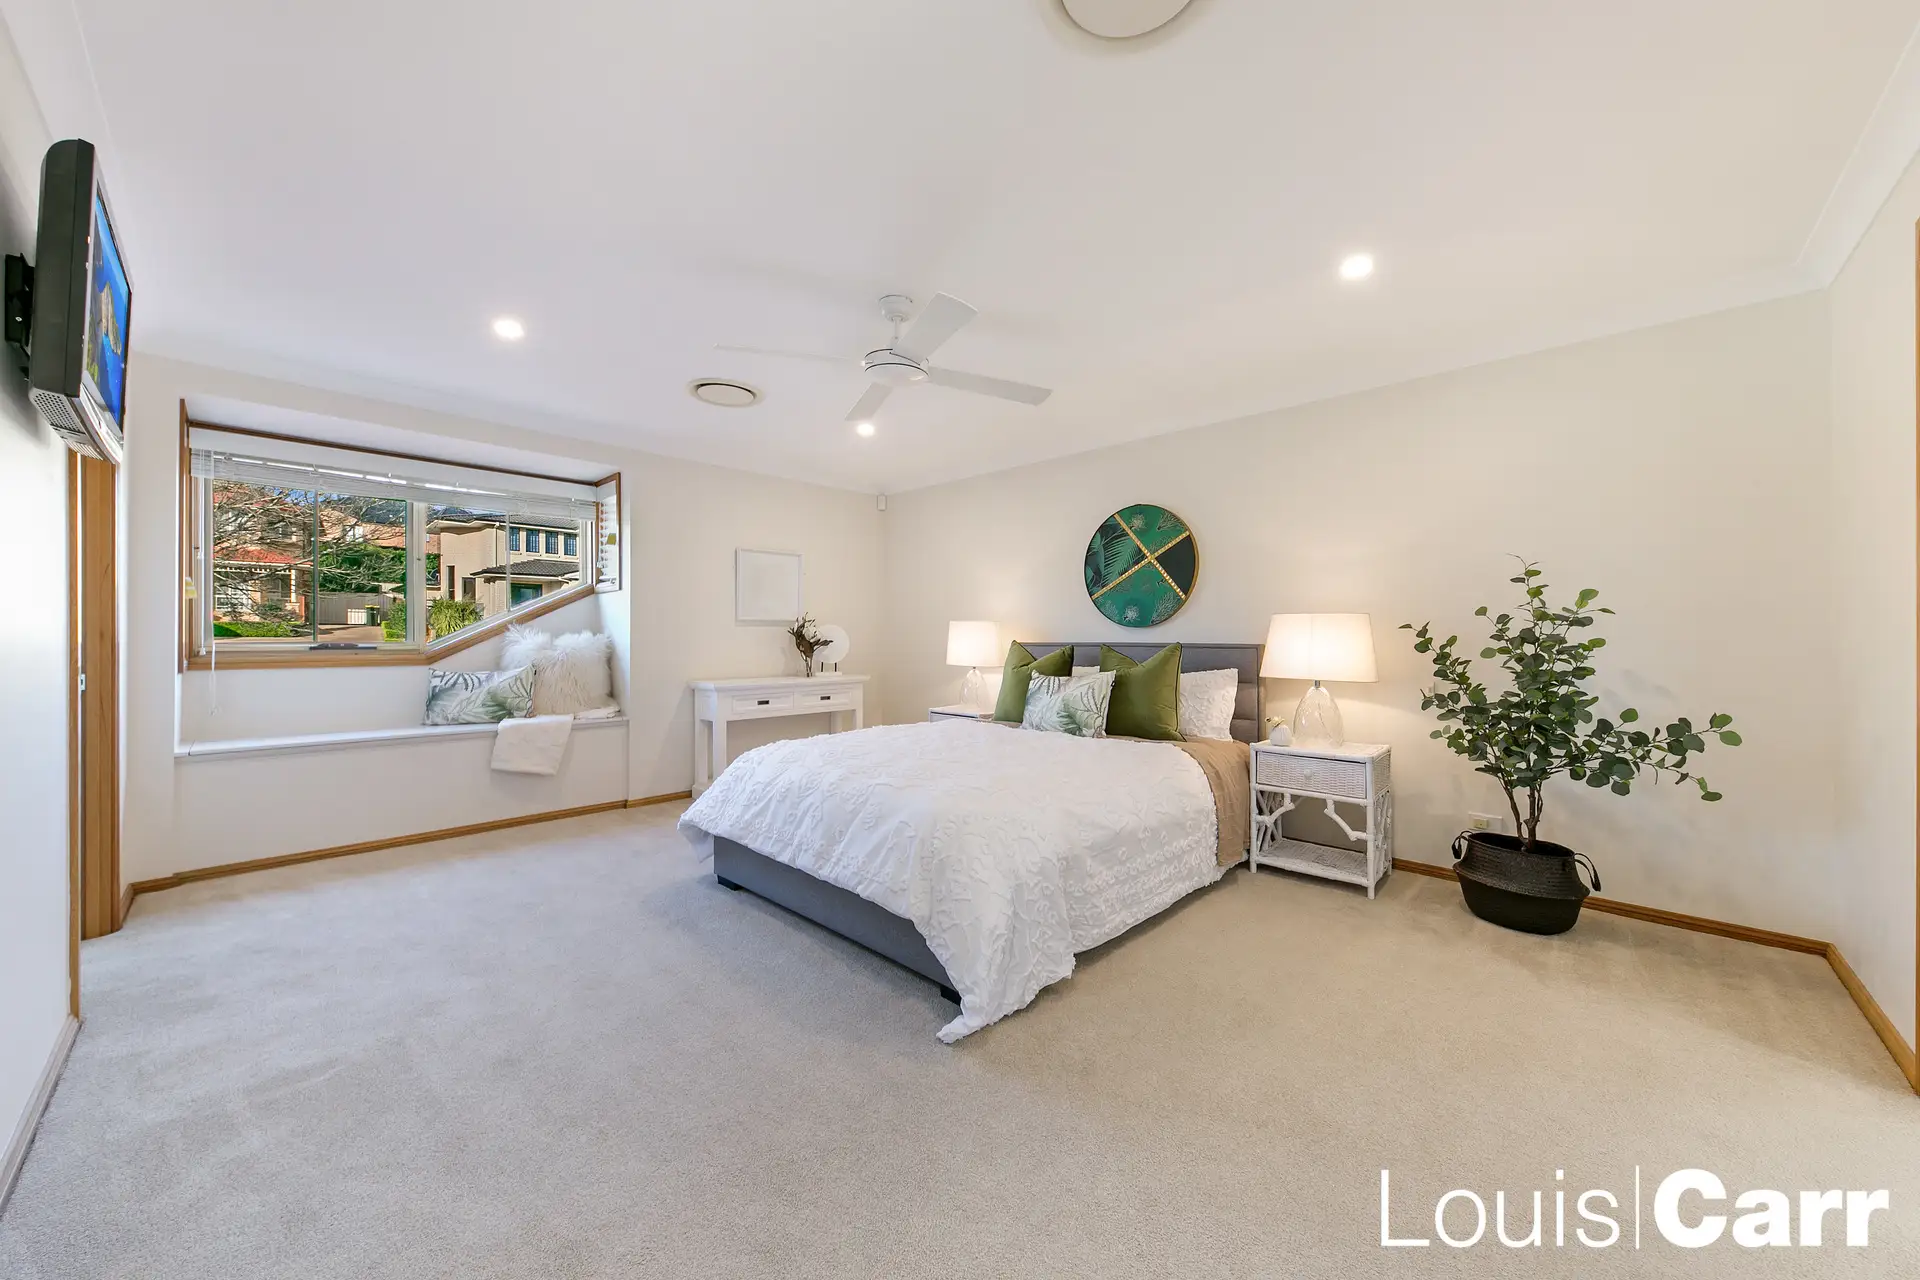 Photo #12: 44 Perisher Road, Beaumont Hills - Sold by Louis Carr Real Estate